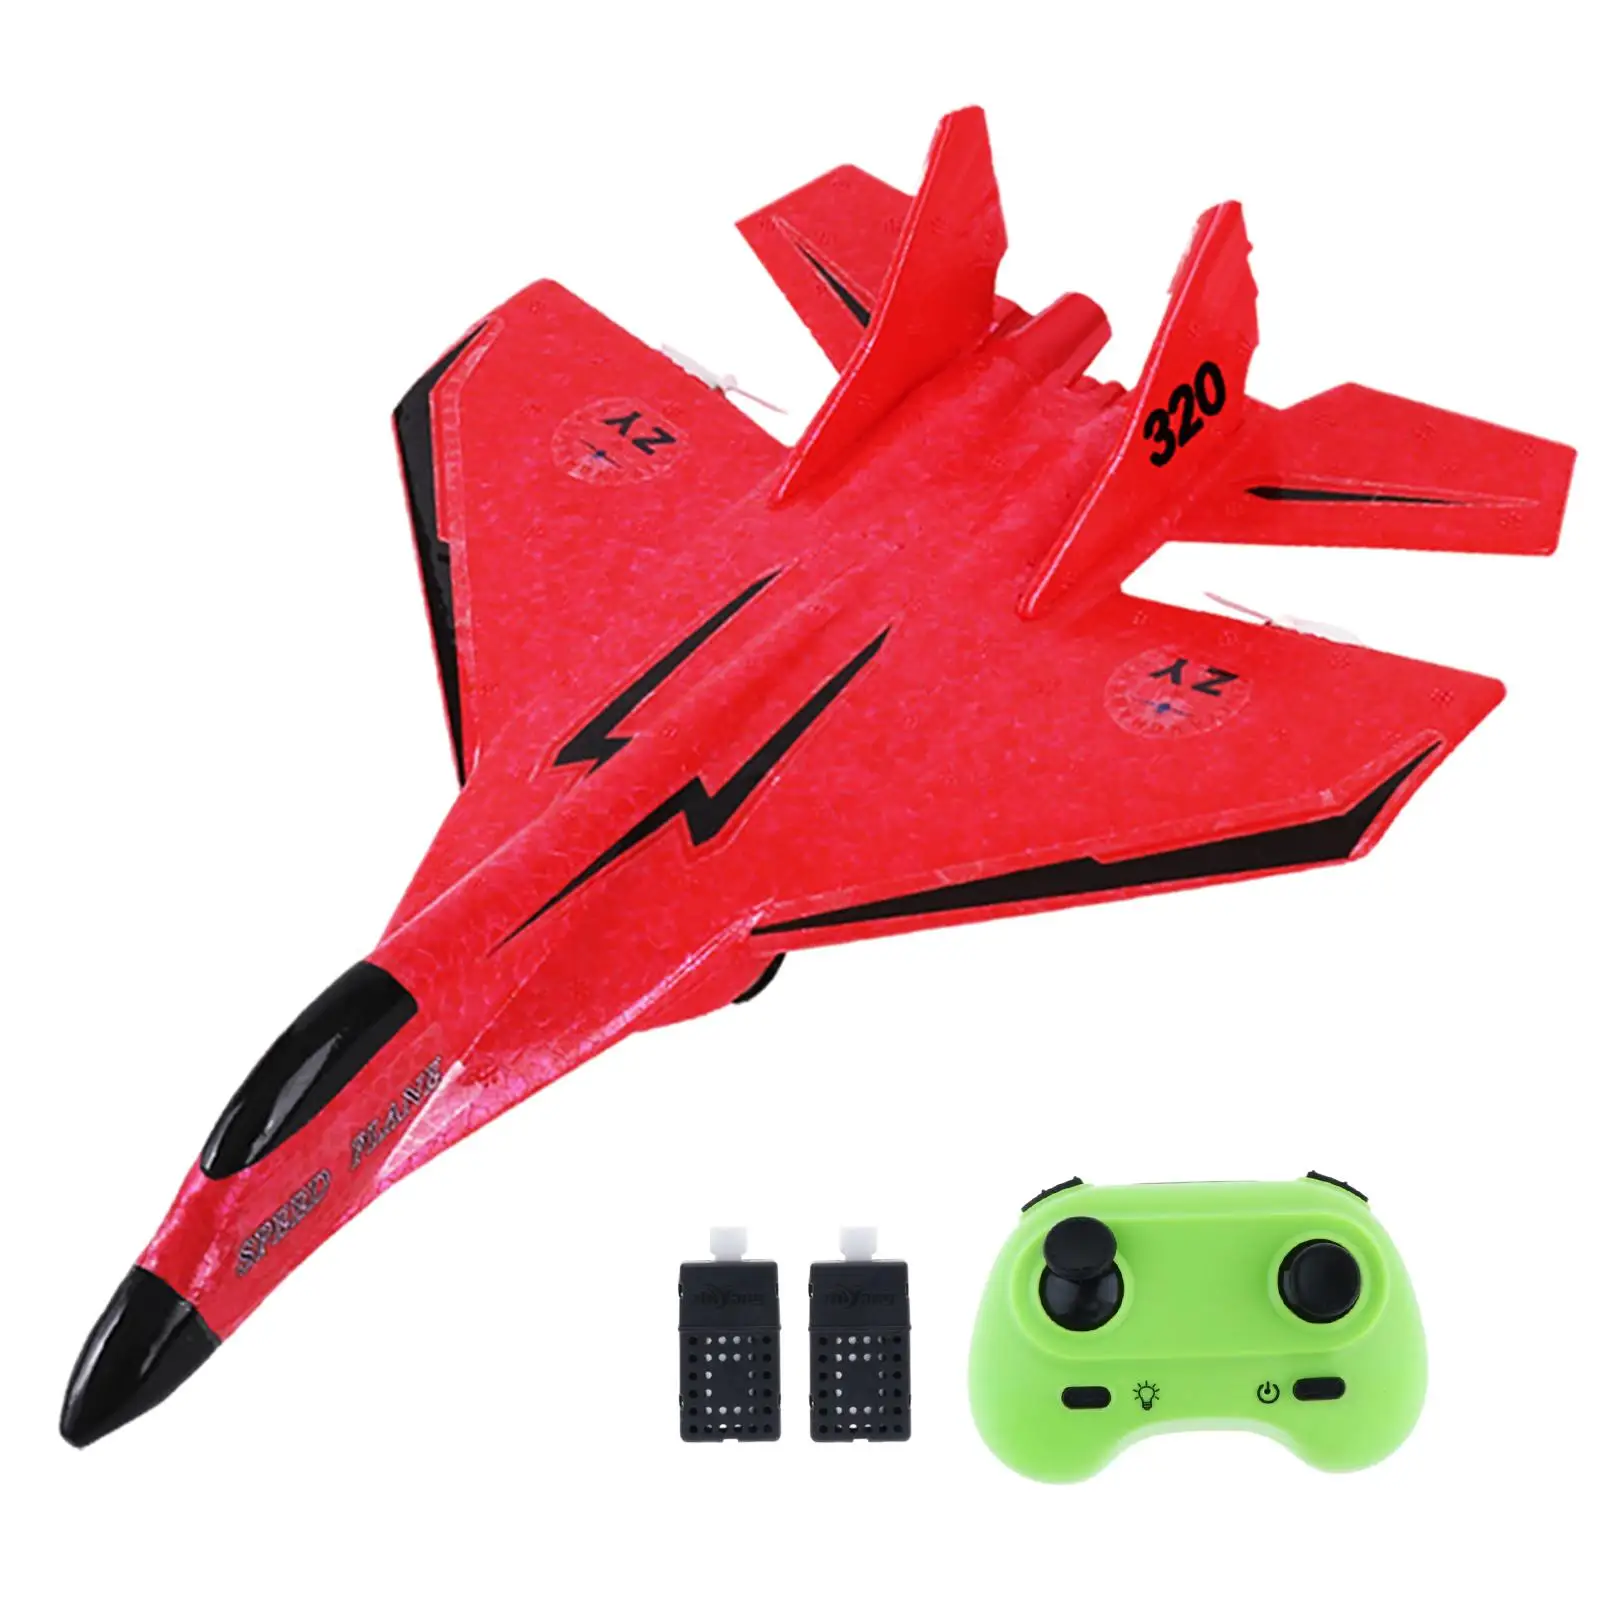 2 CH RC Plane Ready to Fly Outdoor Flighting Toys Gift Easy to Fly Aircraft Jet RC Glider for Boys Girls Kids Adults Beginner